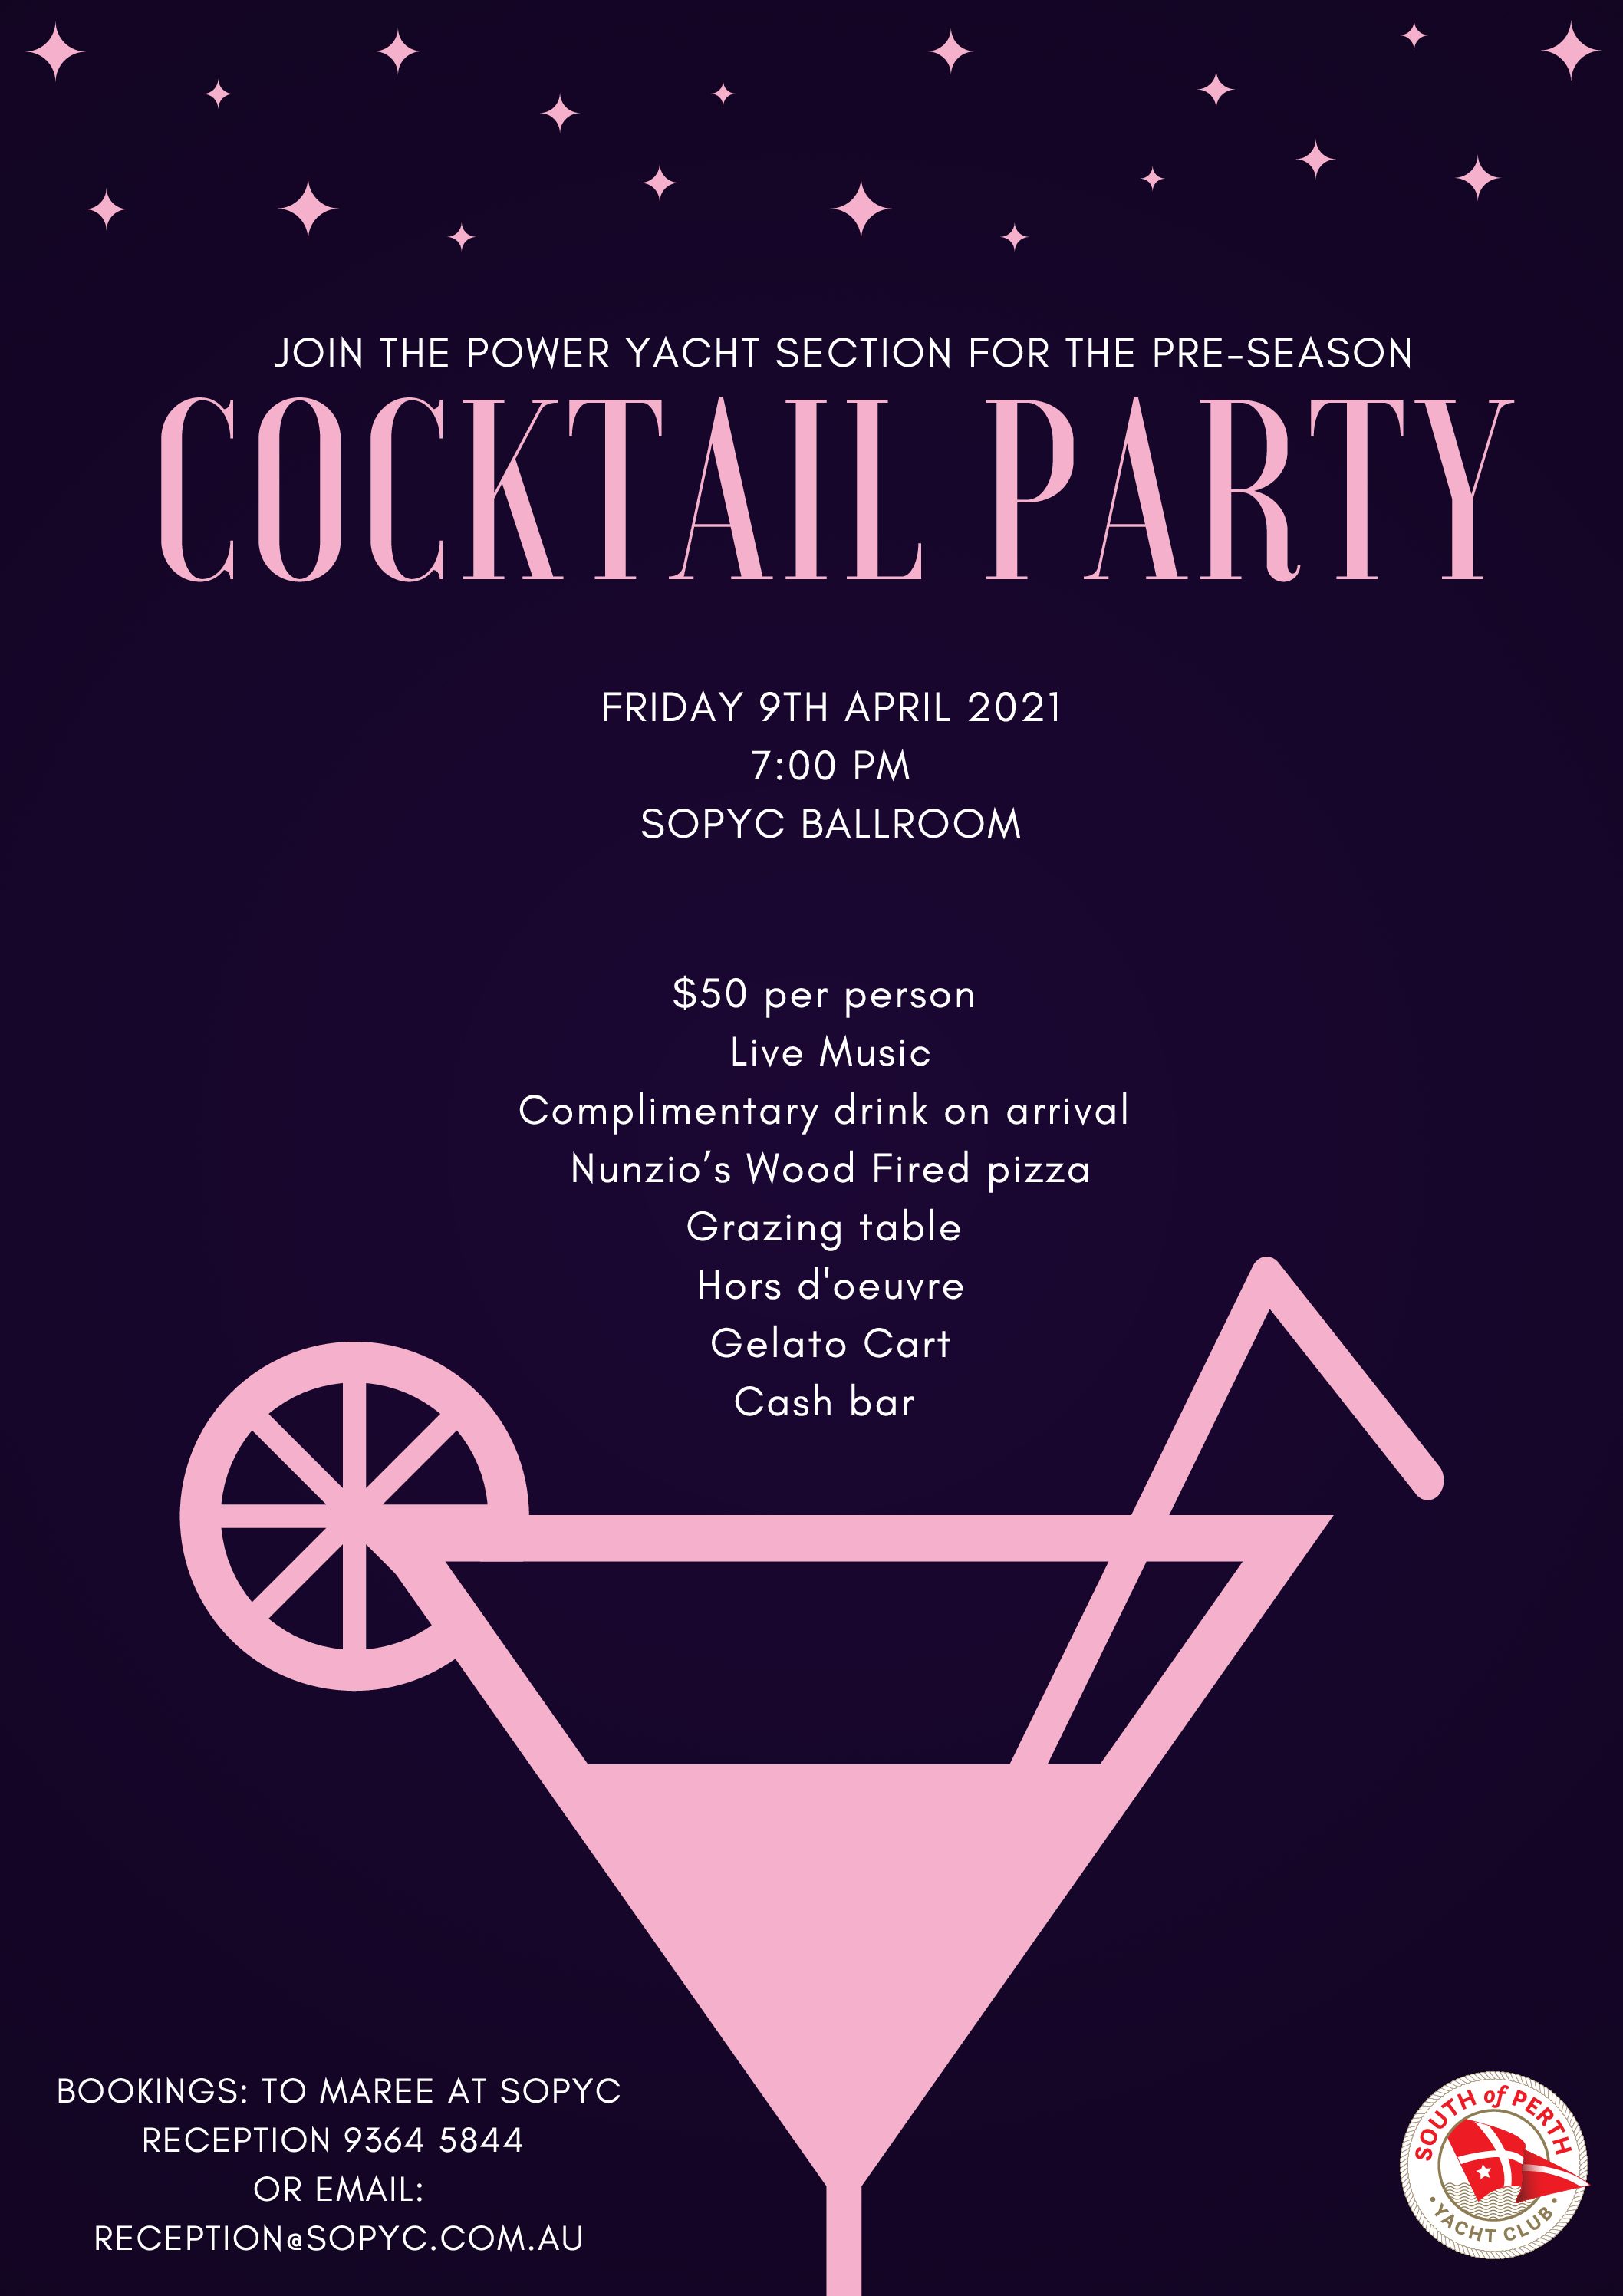 Cocktail Party - All Members invited - Power Yacht Section